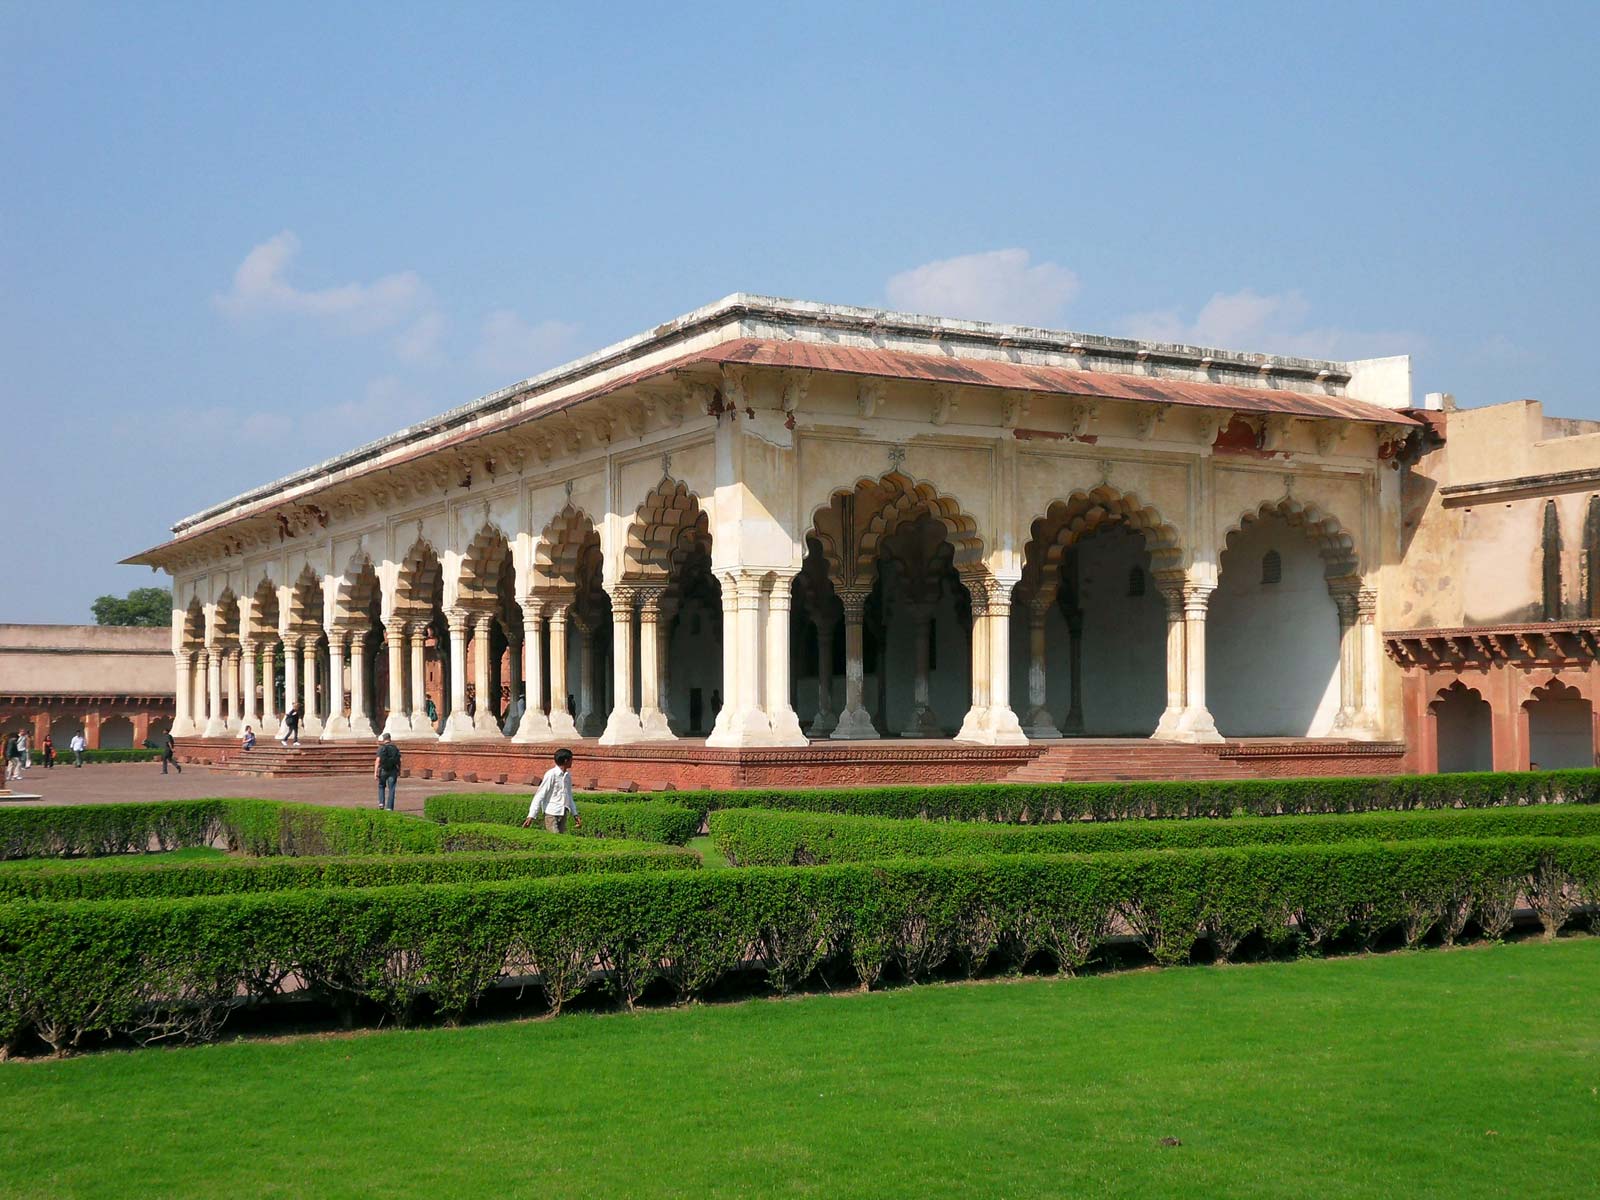 Agra Fort (fortress, Agra, India)